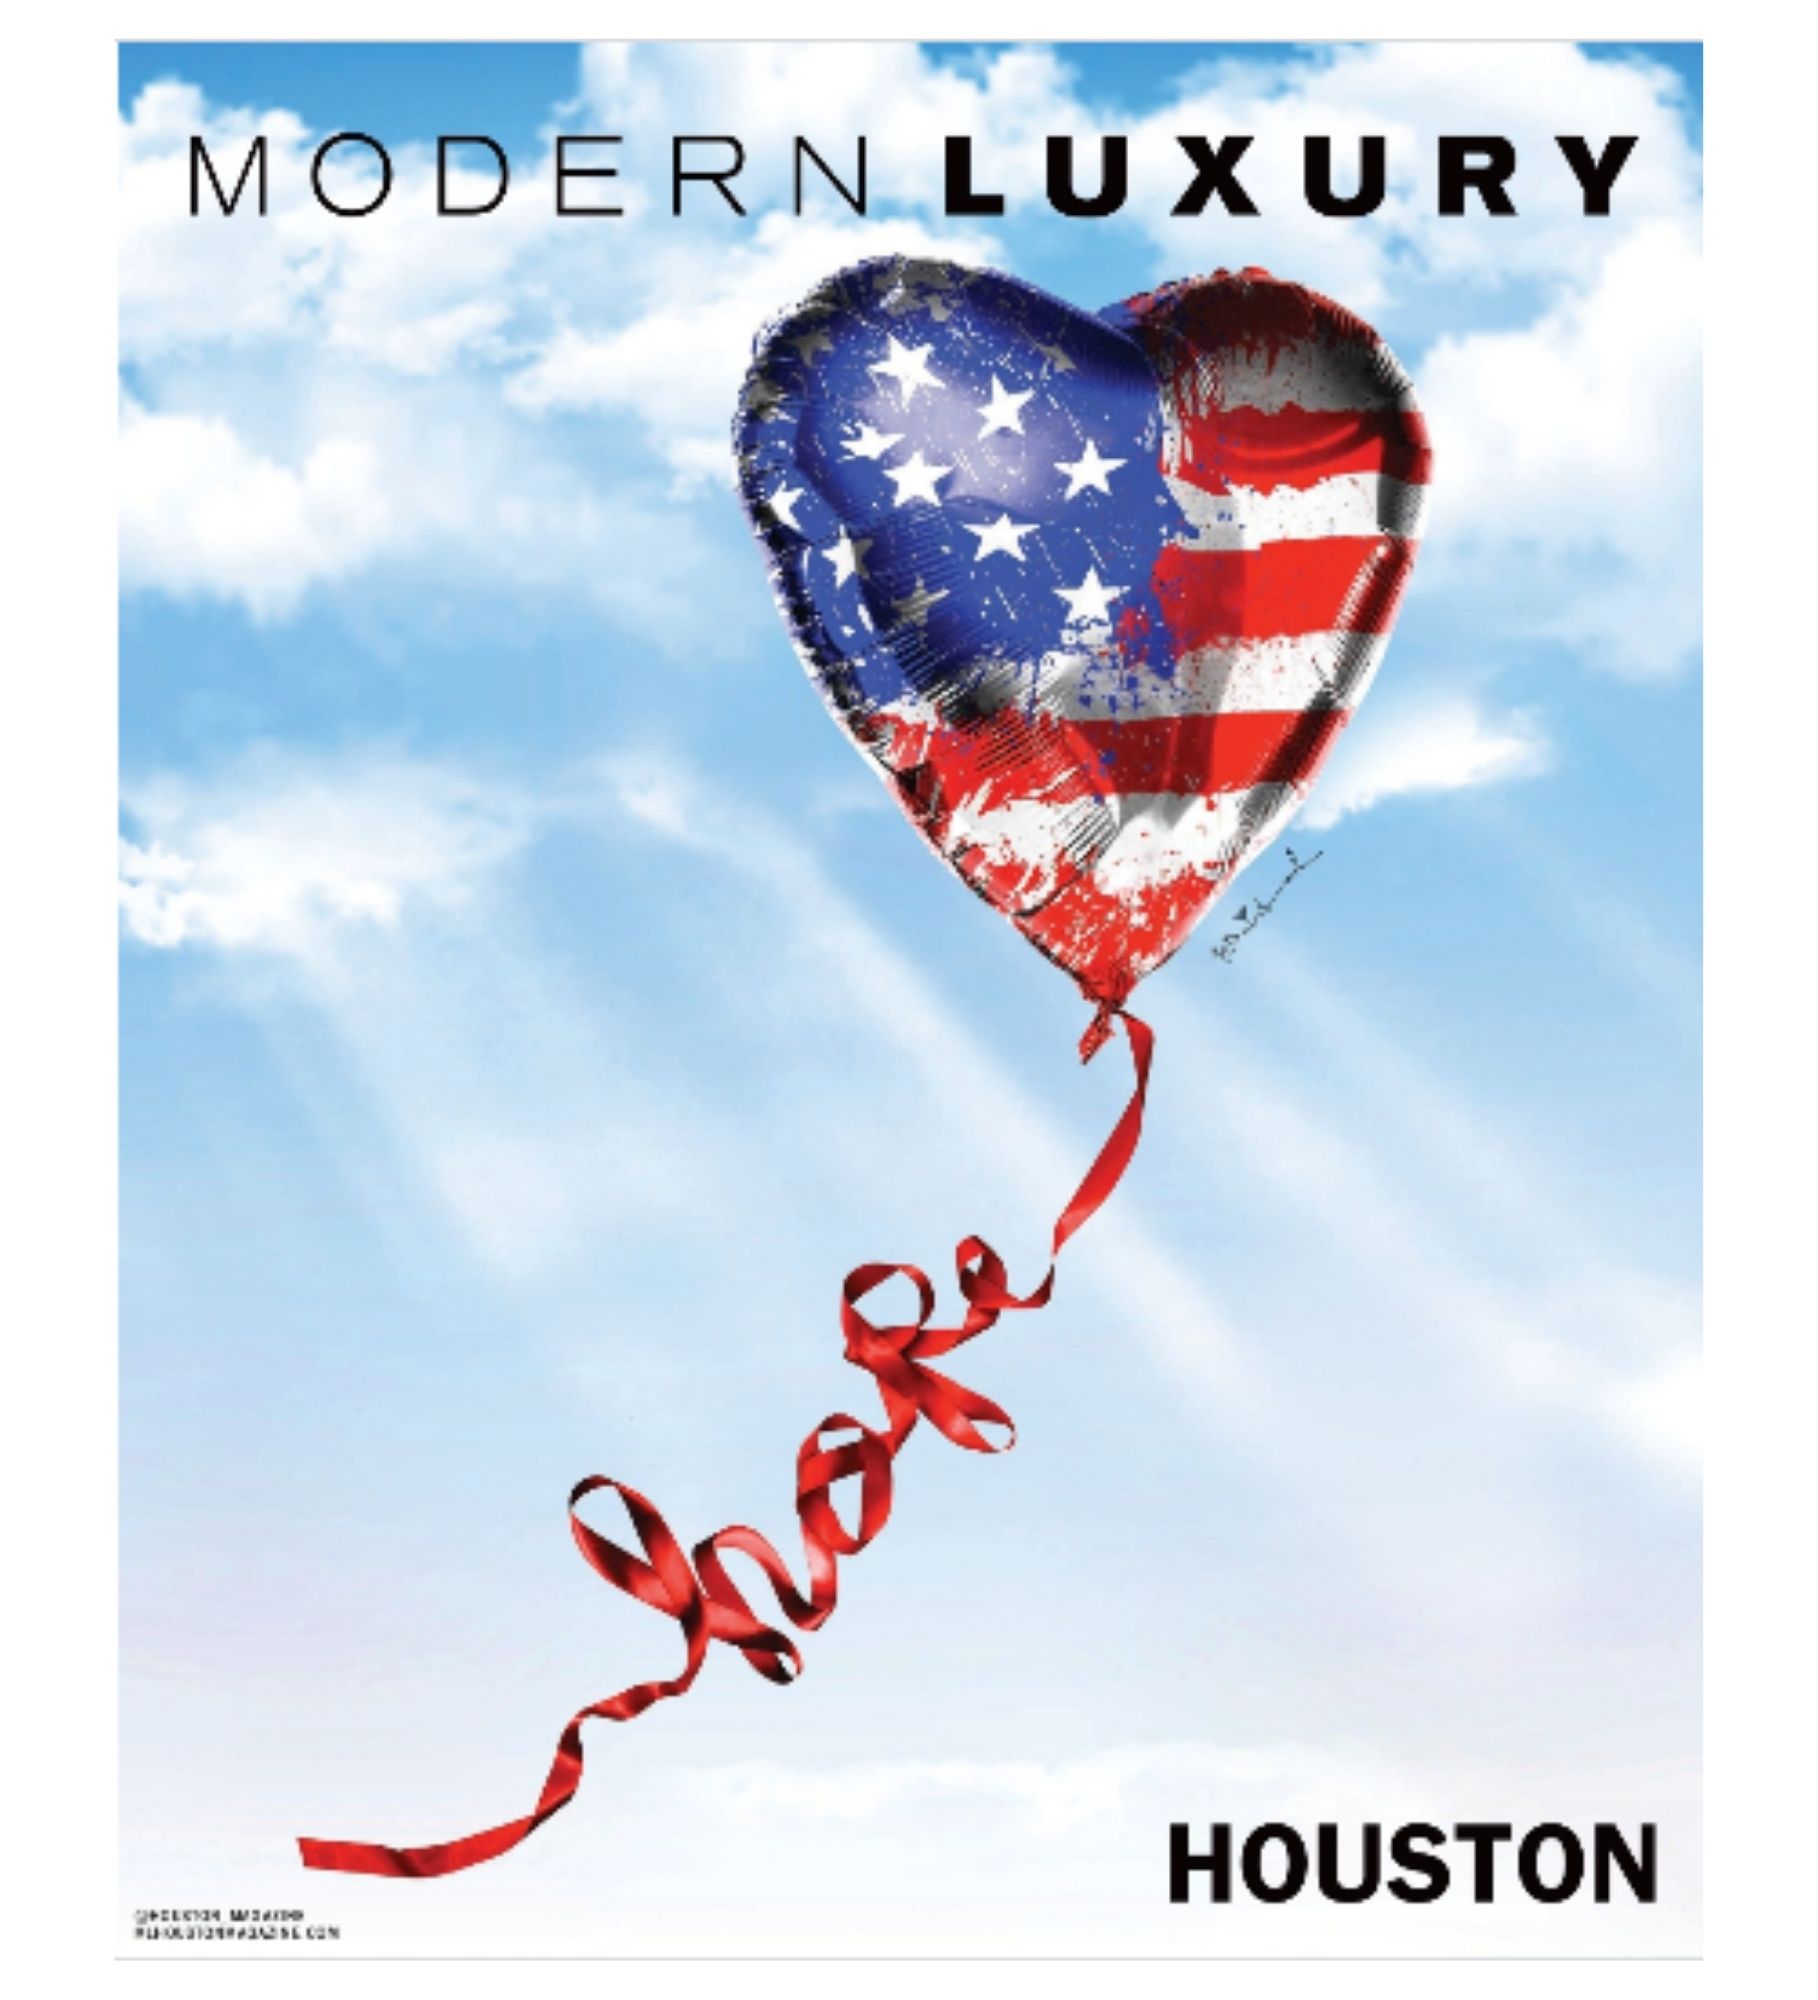 Modern Luxury Interiors Texas Hope issue featuring Modern Moms Laura Umansky and Gina Brown